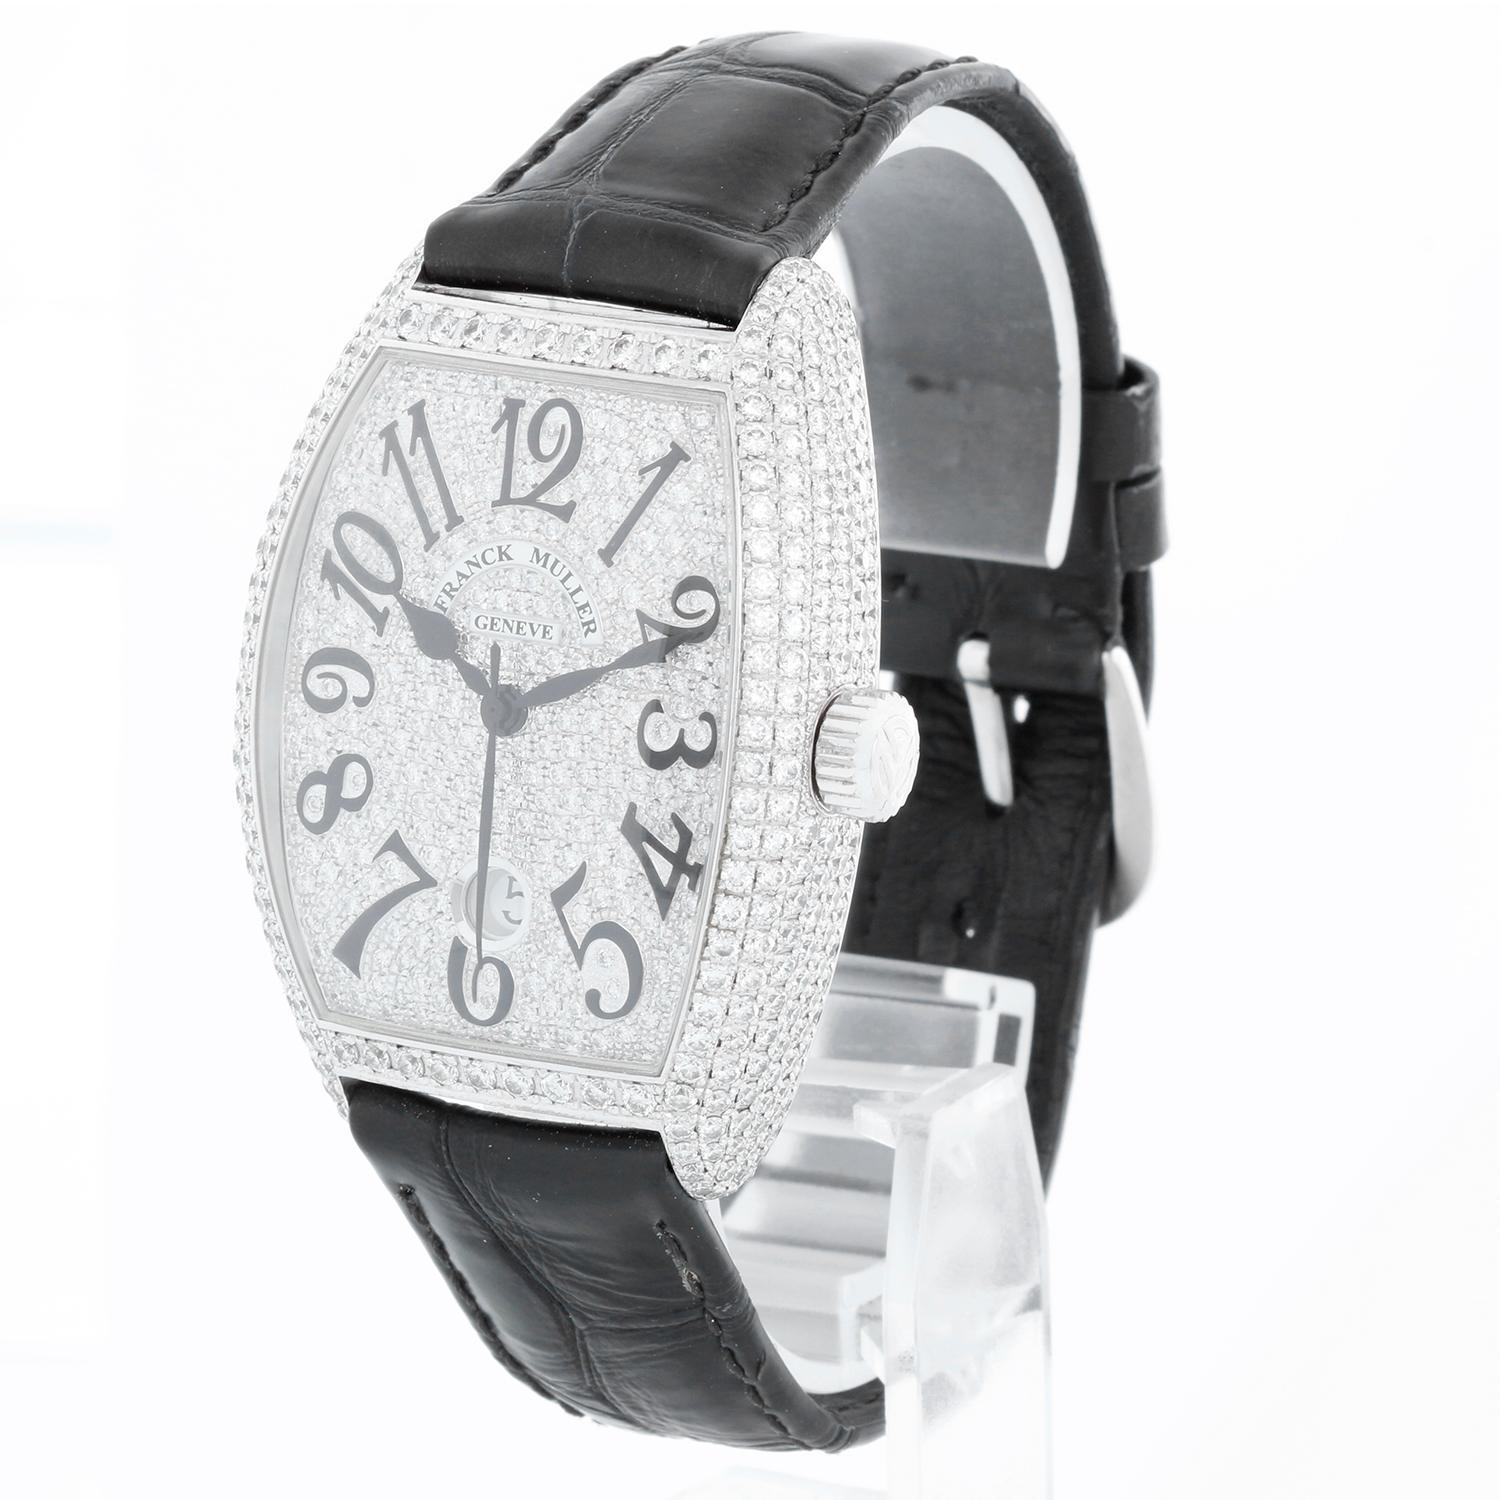 Franck Muller Casablanca 18K White Gold Diamond Watch 7880 SC DT D6 CD - Automatic. 18K white gold case with pave diamond case; tonneau ( 39 mm x 50 mm ). Pave diamond dial with date at 6 o'clock. Black strap with a Franck Muller diamond buckle.